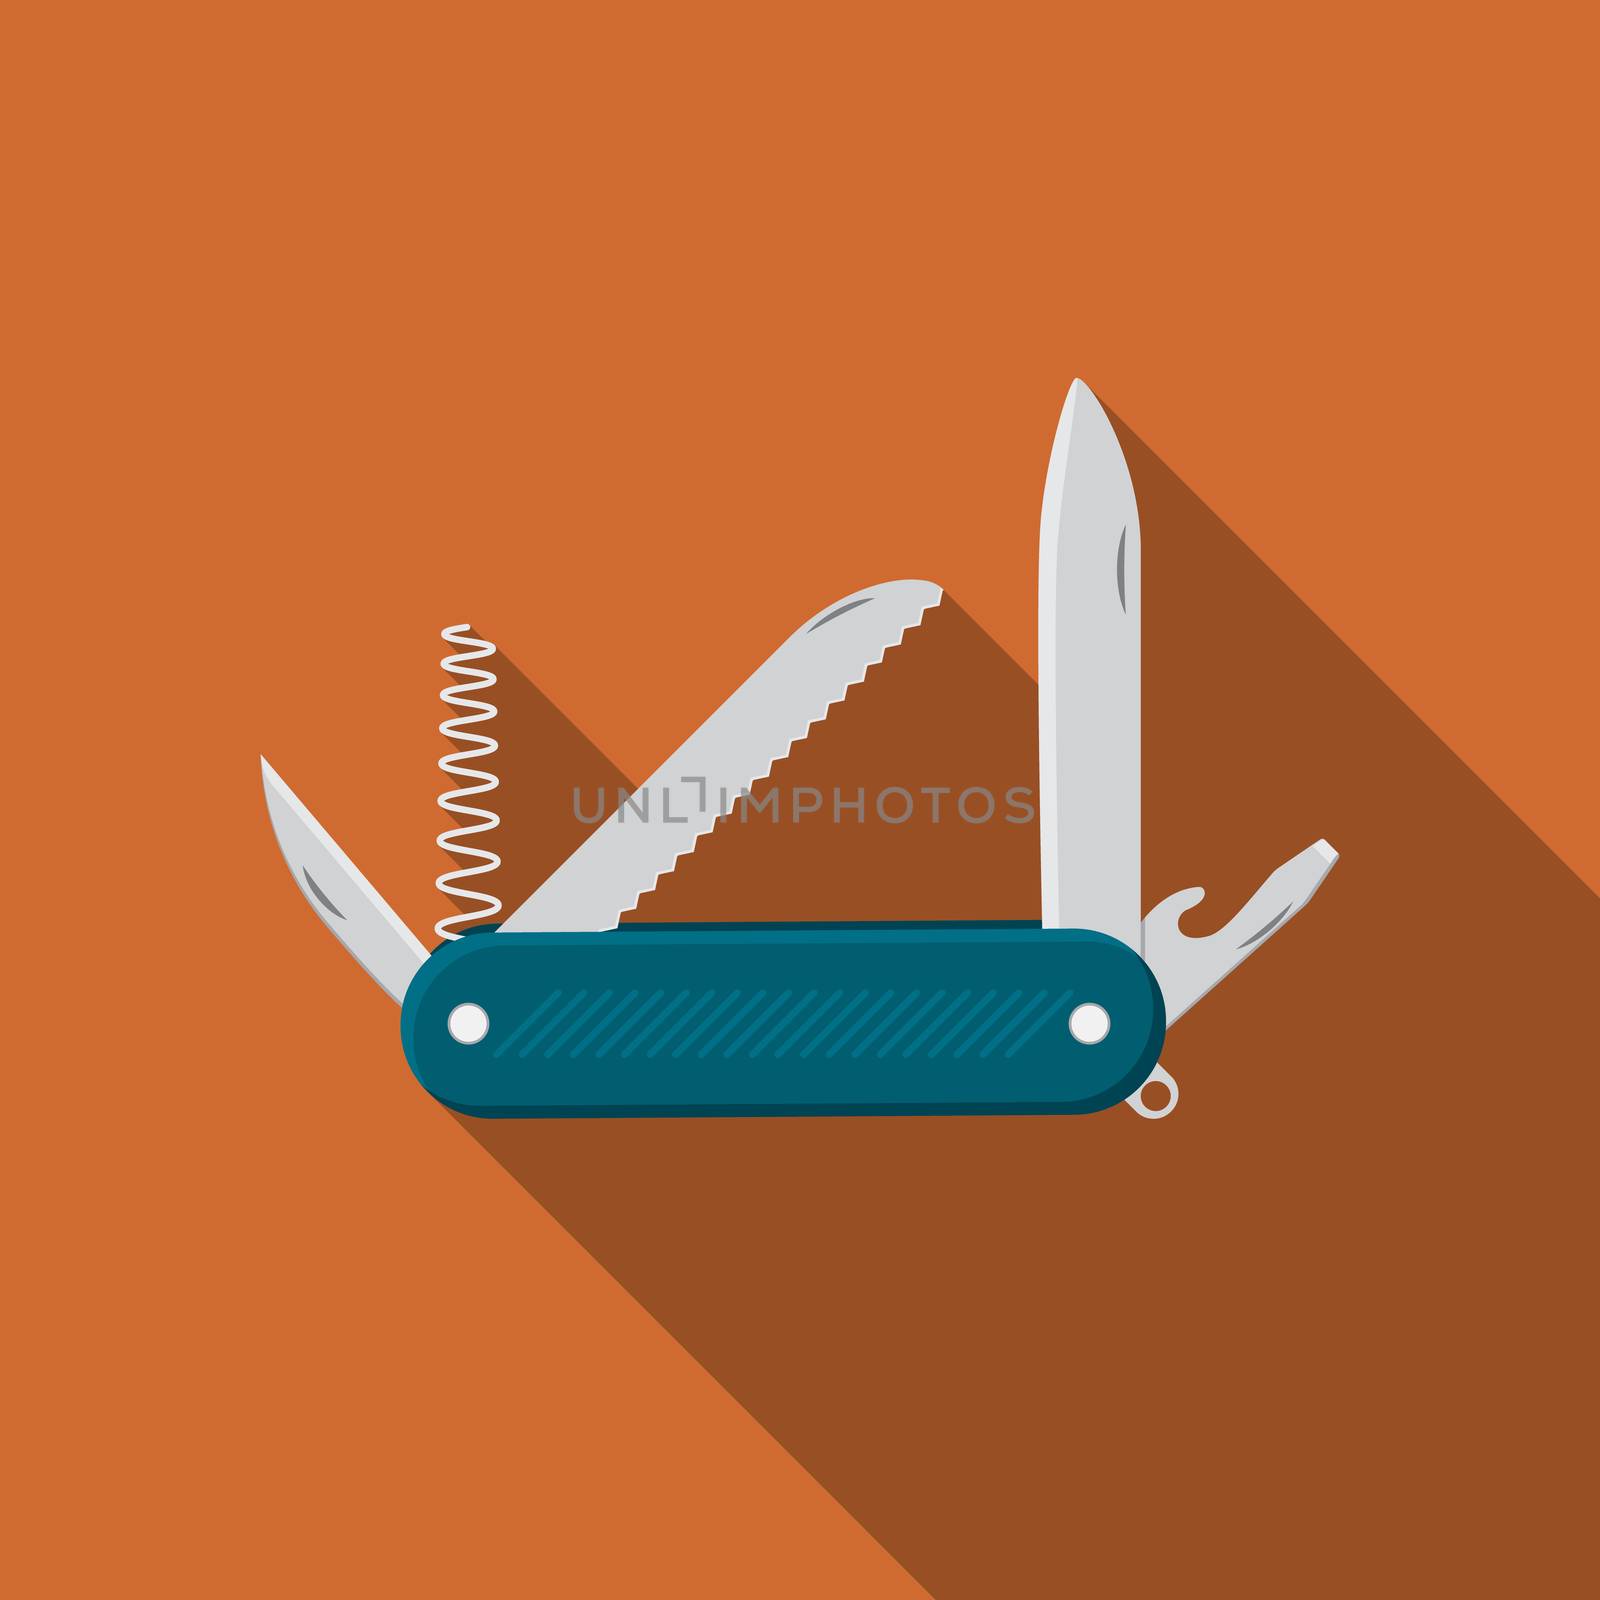 Flat design modern vector illustration of multifunctional pocket knife icon, camping and hiking equipment with long shadow by Lemon_workshop